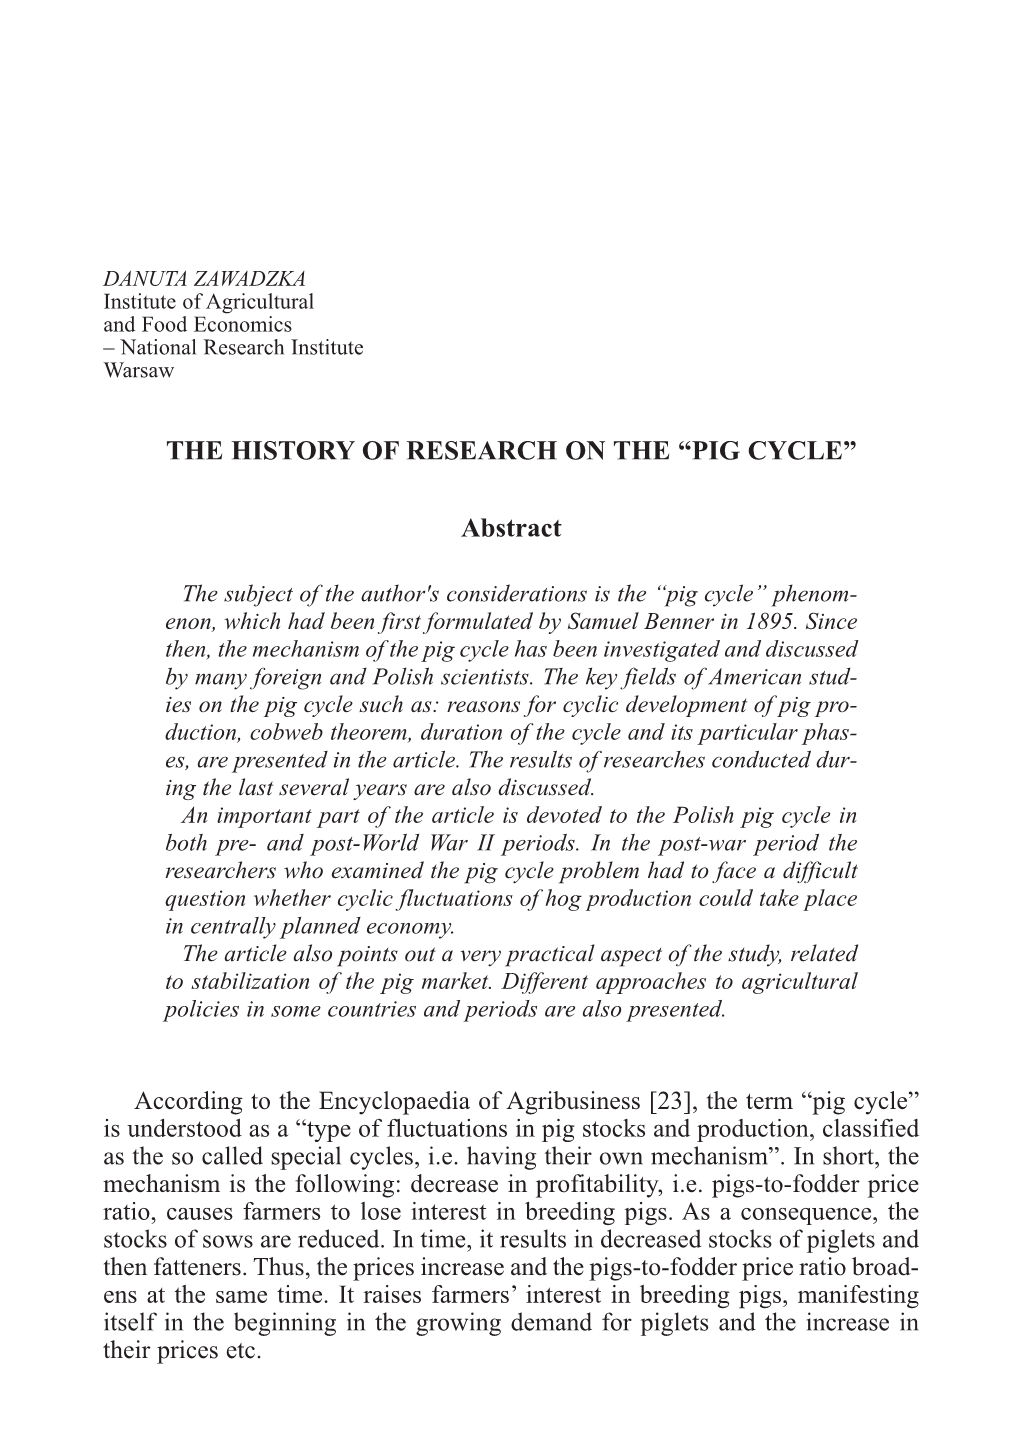 THE HISTORY of RESEARCH on the “PIG CYCLE” Abstract